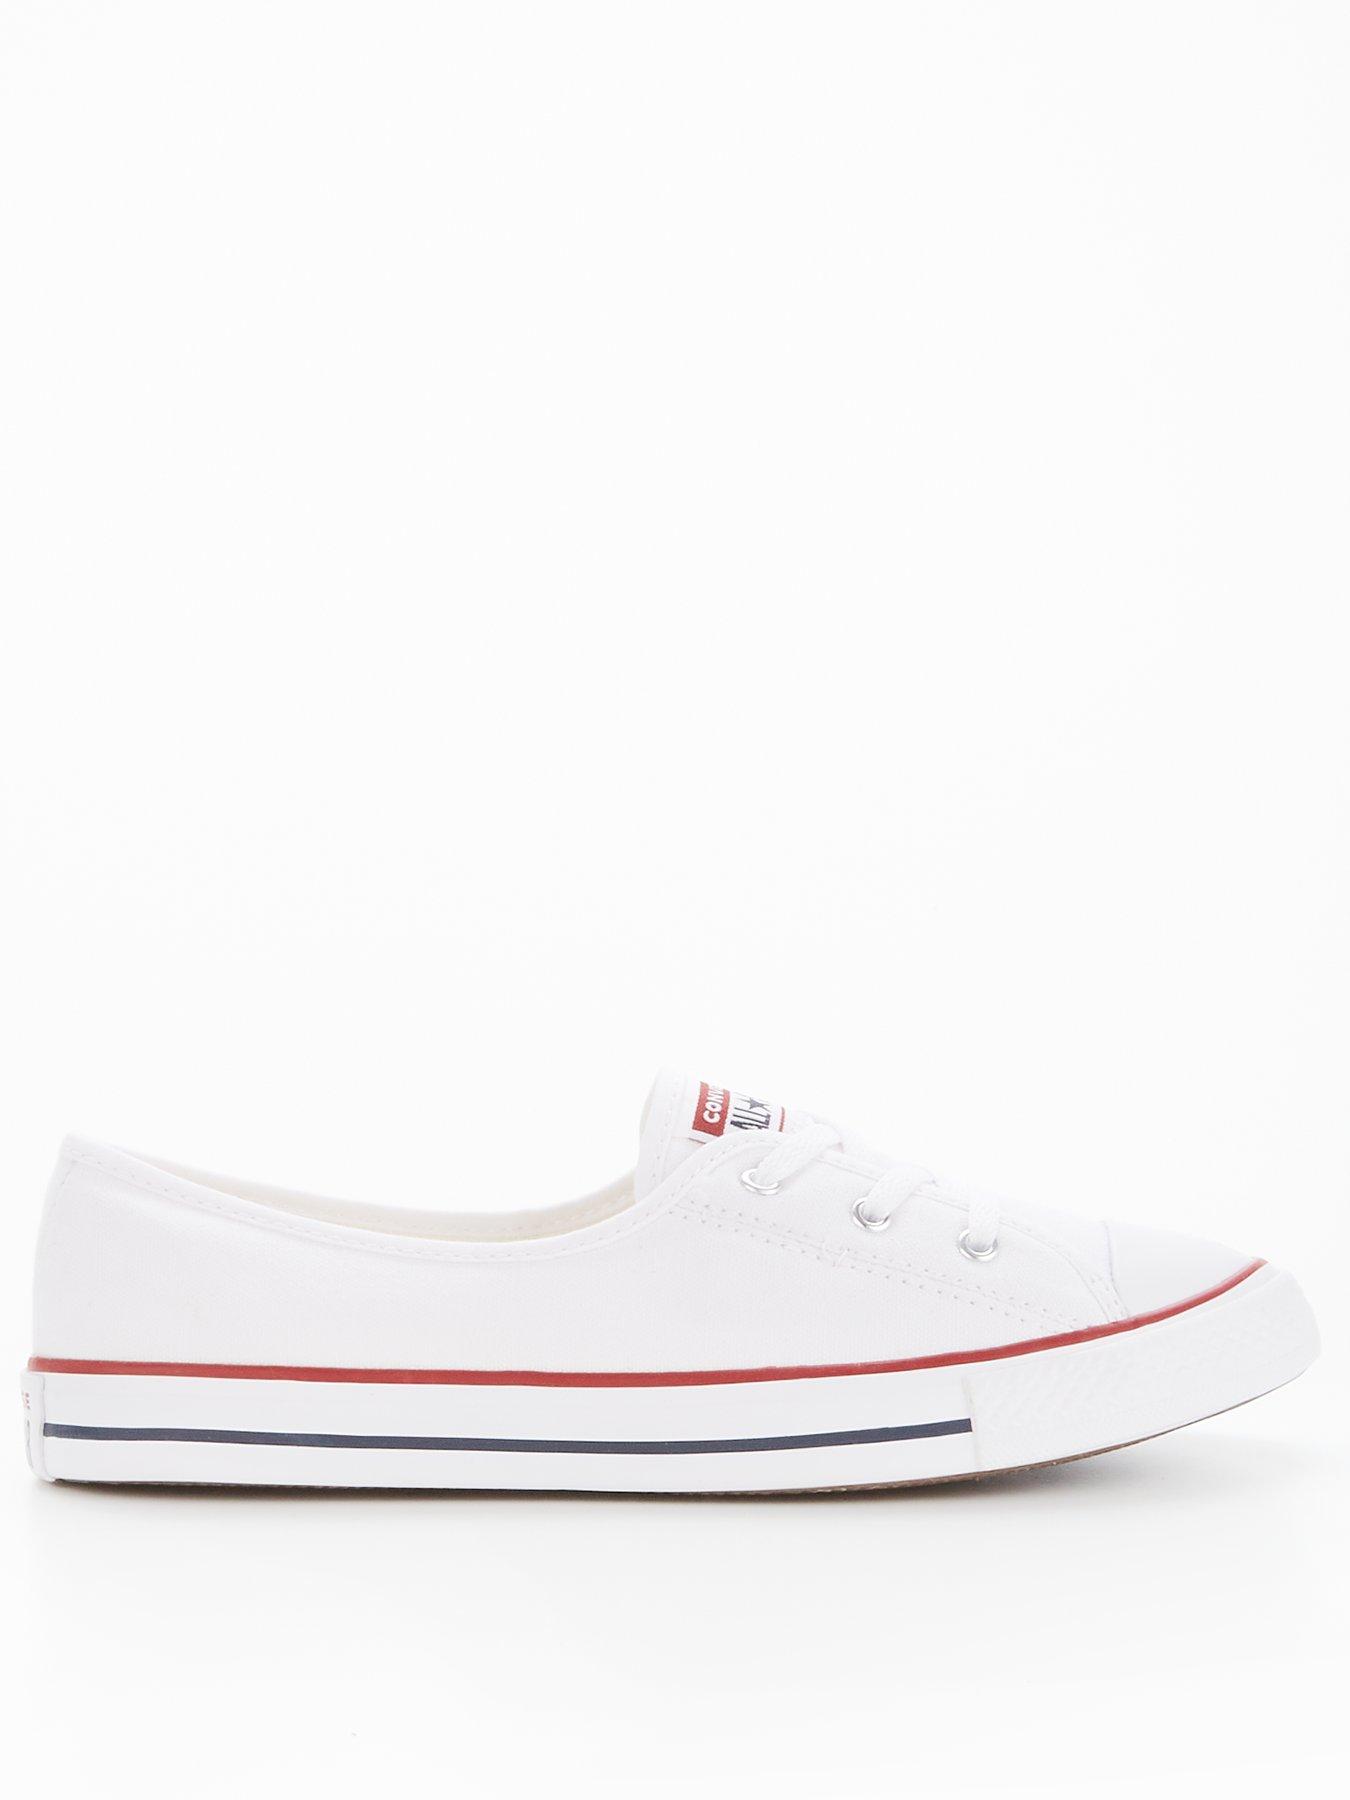 converse chuck taylor all star ballet lace